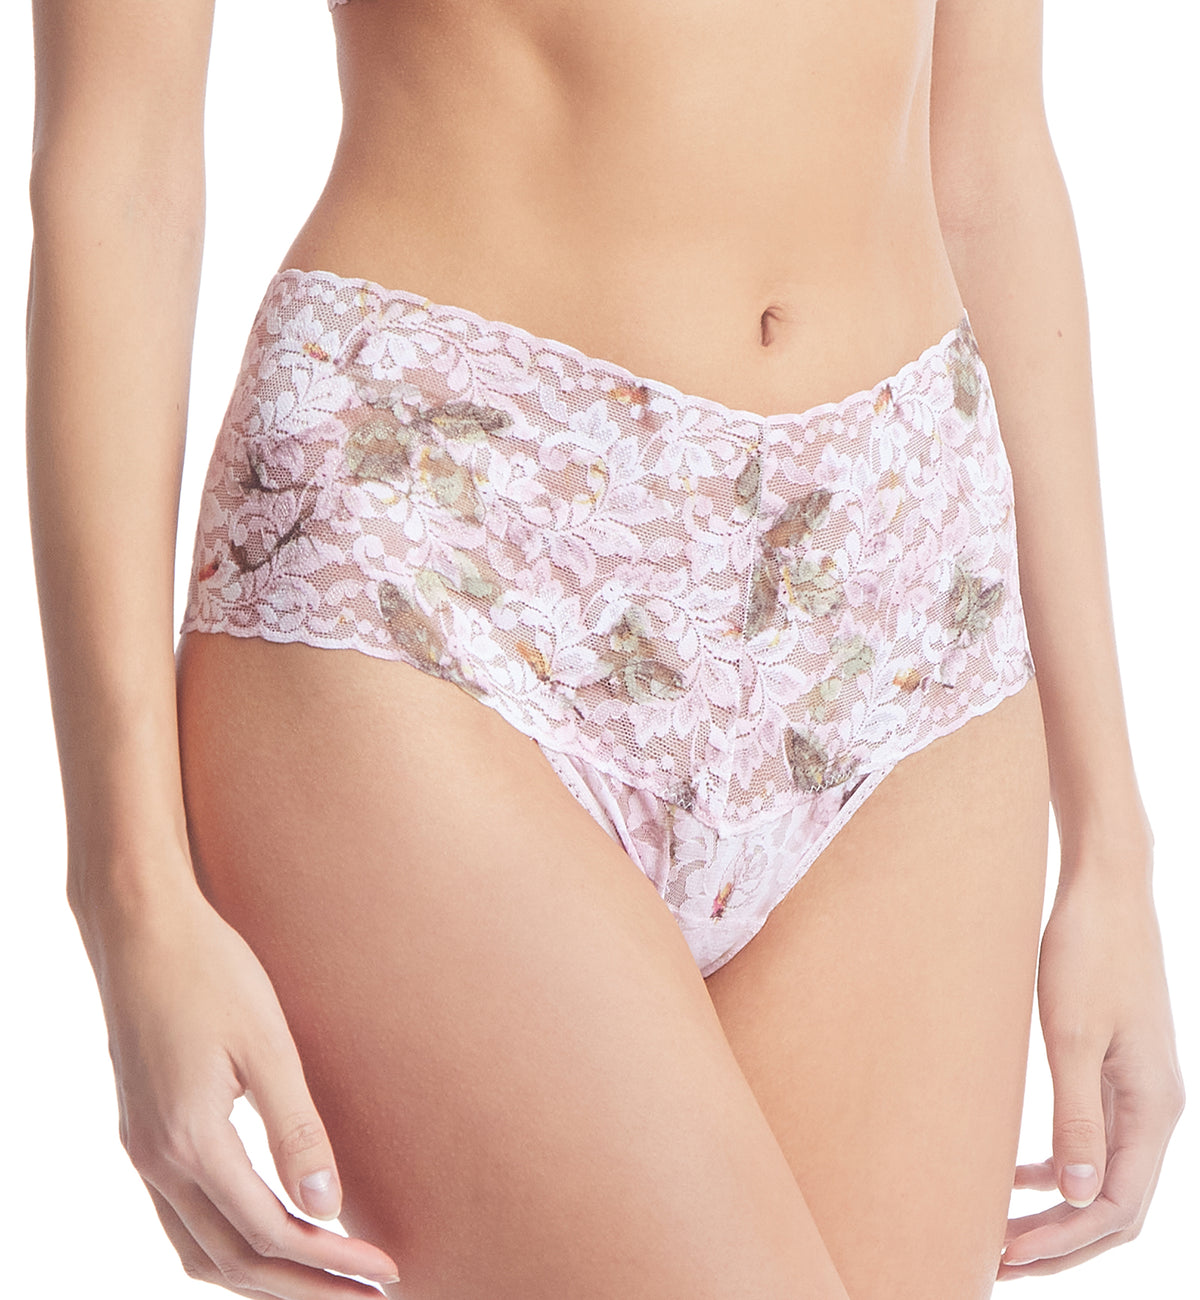 Hanky Panky Printed Retro Lace Thong (PR9K1926),Antique Lily - Antique Lily,One Size